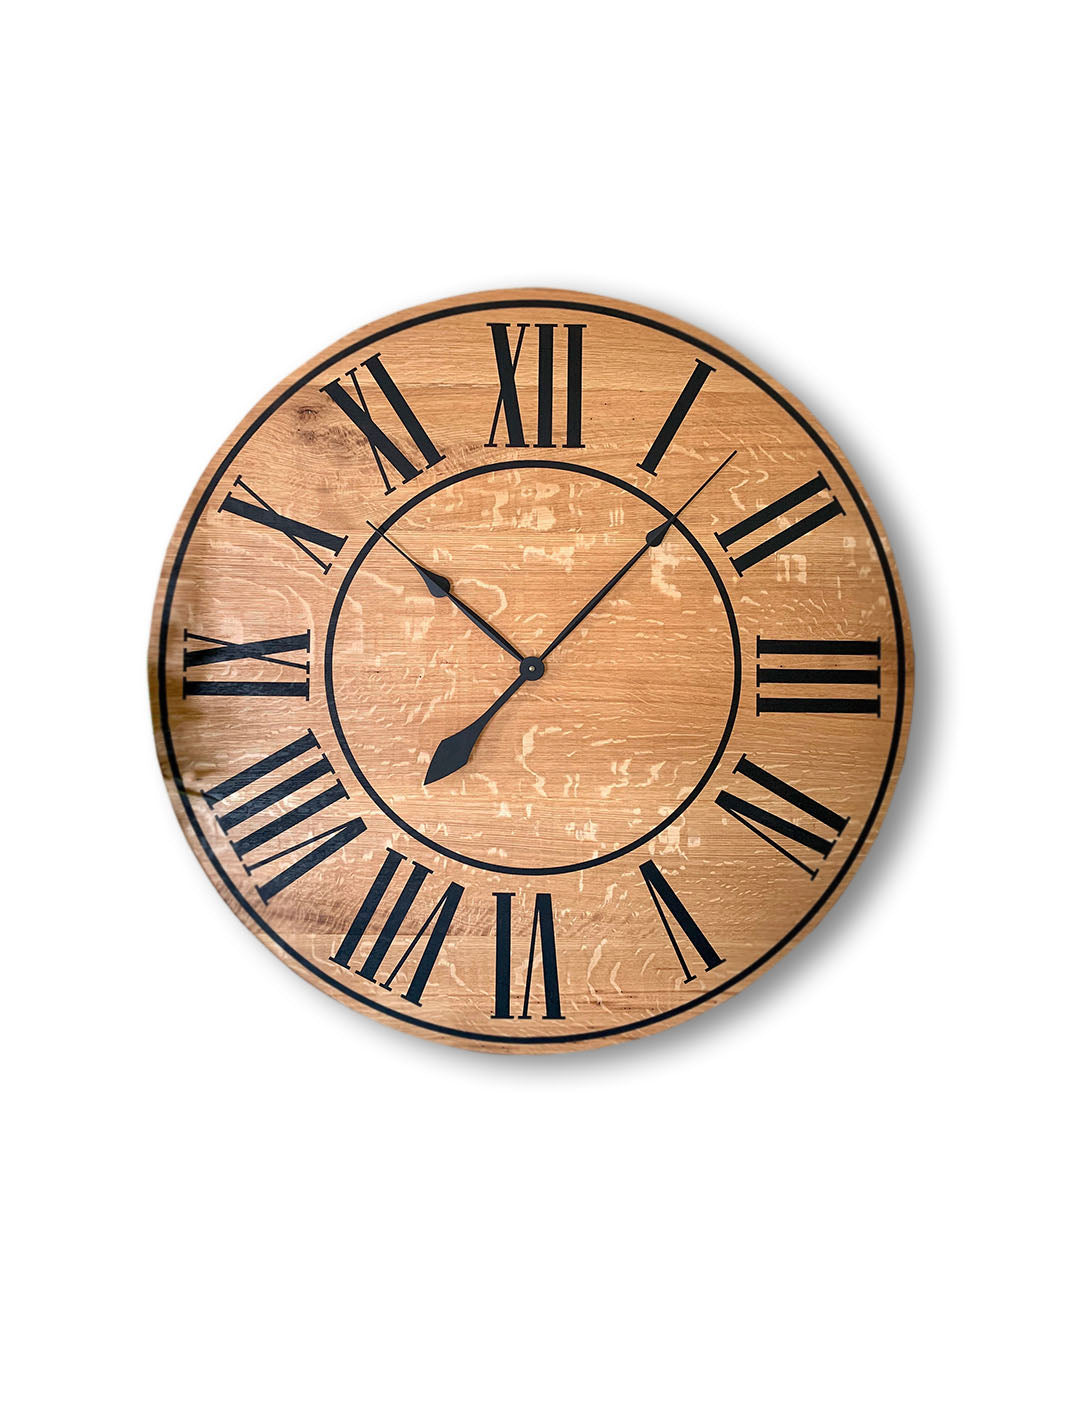 Large Quartersawn White Oak Wall Clock with Black Lines and Roman Numerals Earthly Comfort Clocks 503